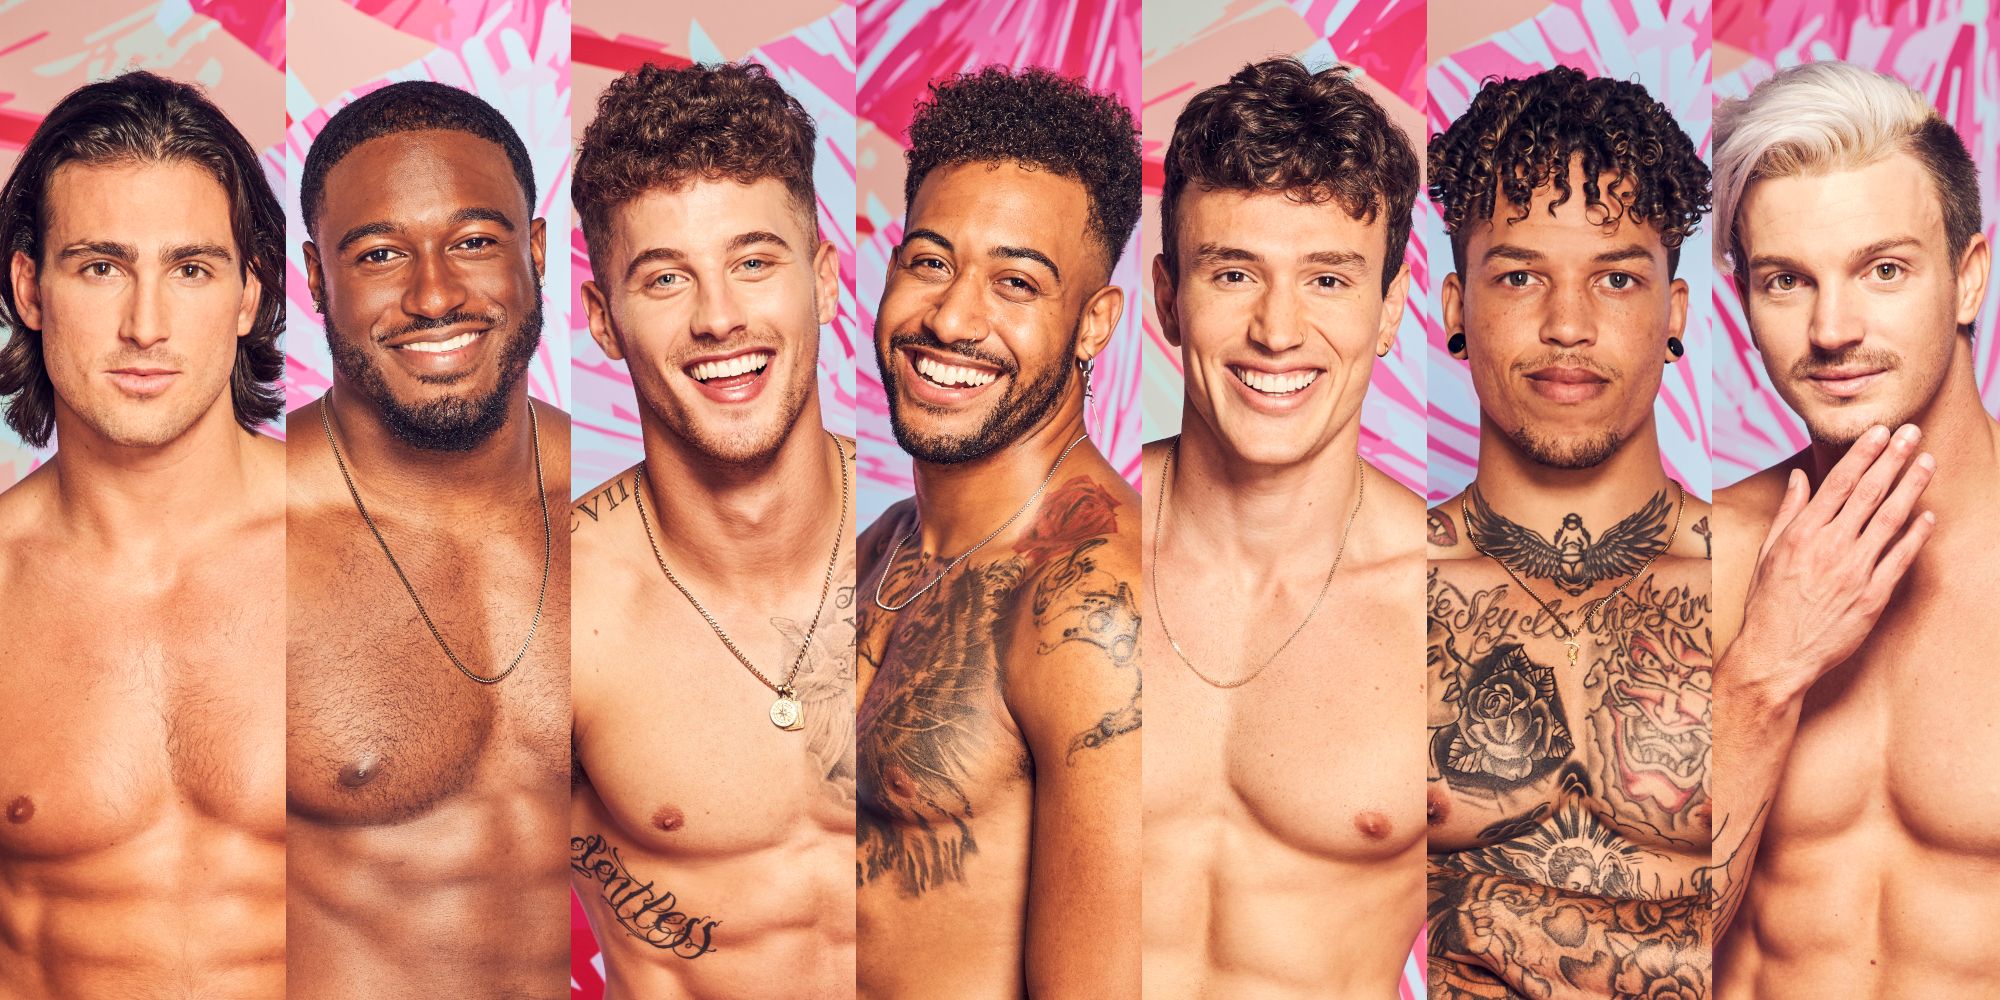 Love Island USA Season 3 Everything To Know About The Cast Of Men